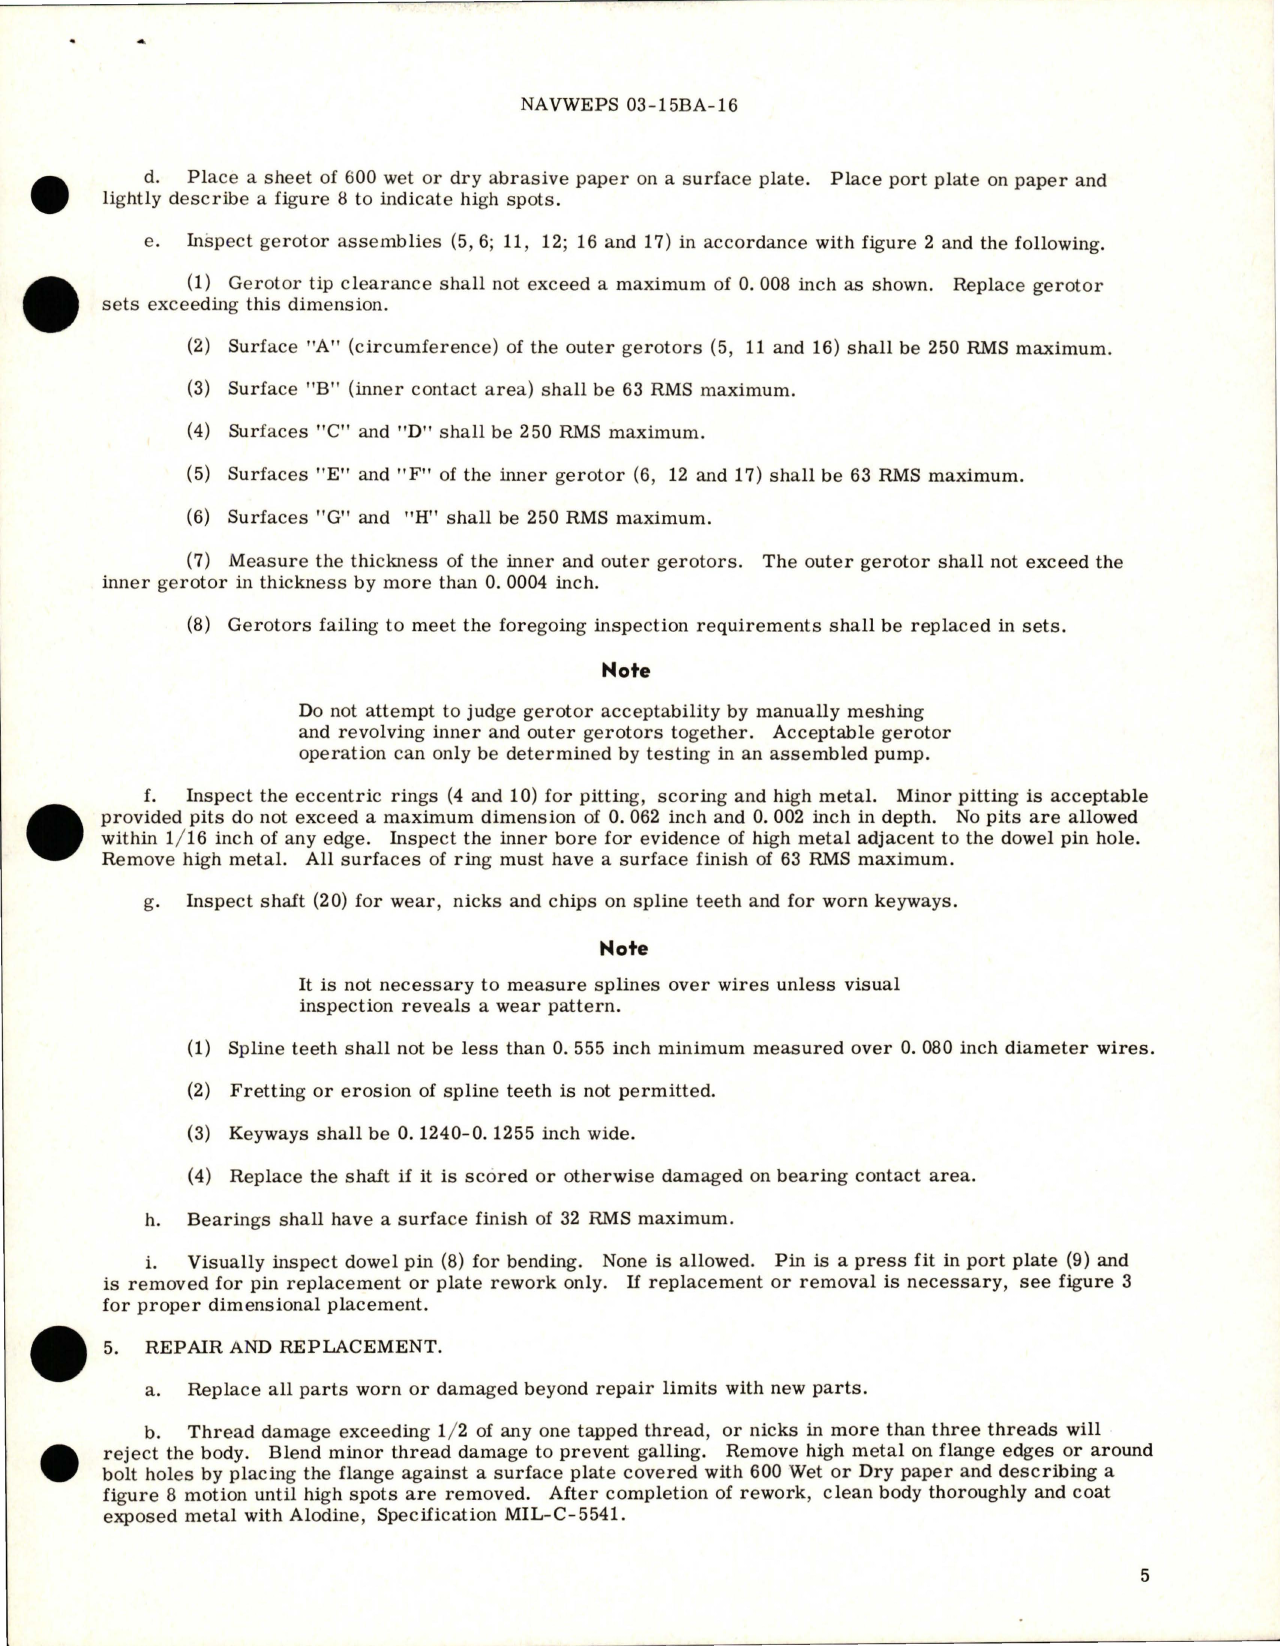 Sample page 5 from AirCorps Library document: Overhaul Instructions with Parts for Transfer Gear Case Scavenge Pump - Model GD 279 and GD 279-1